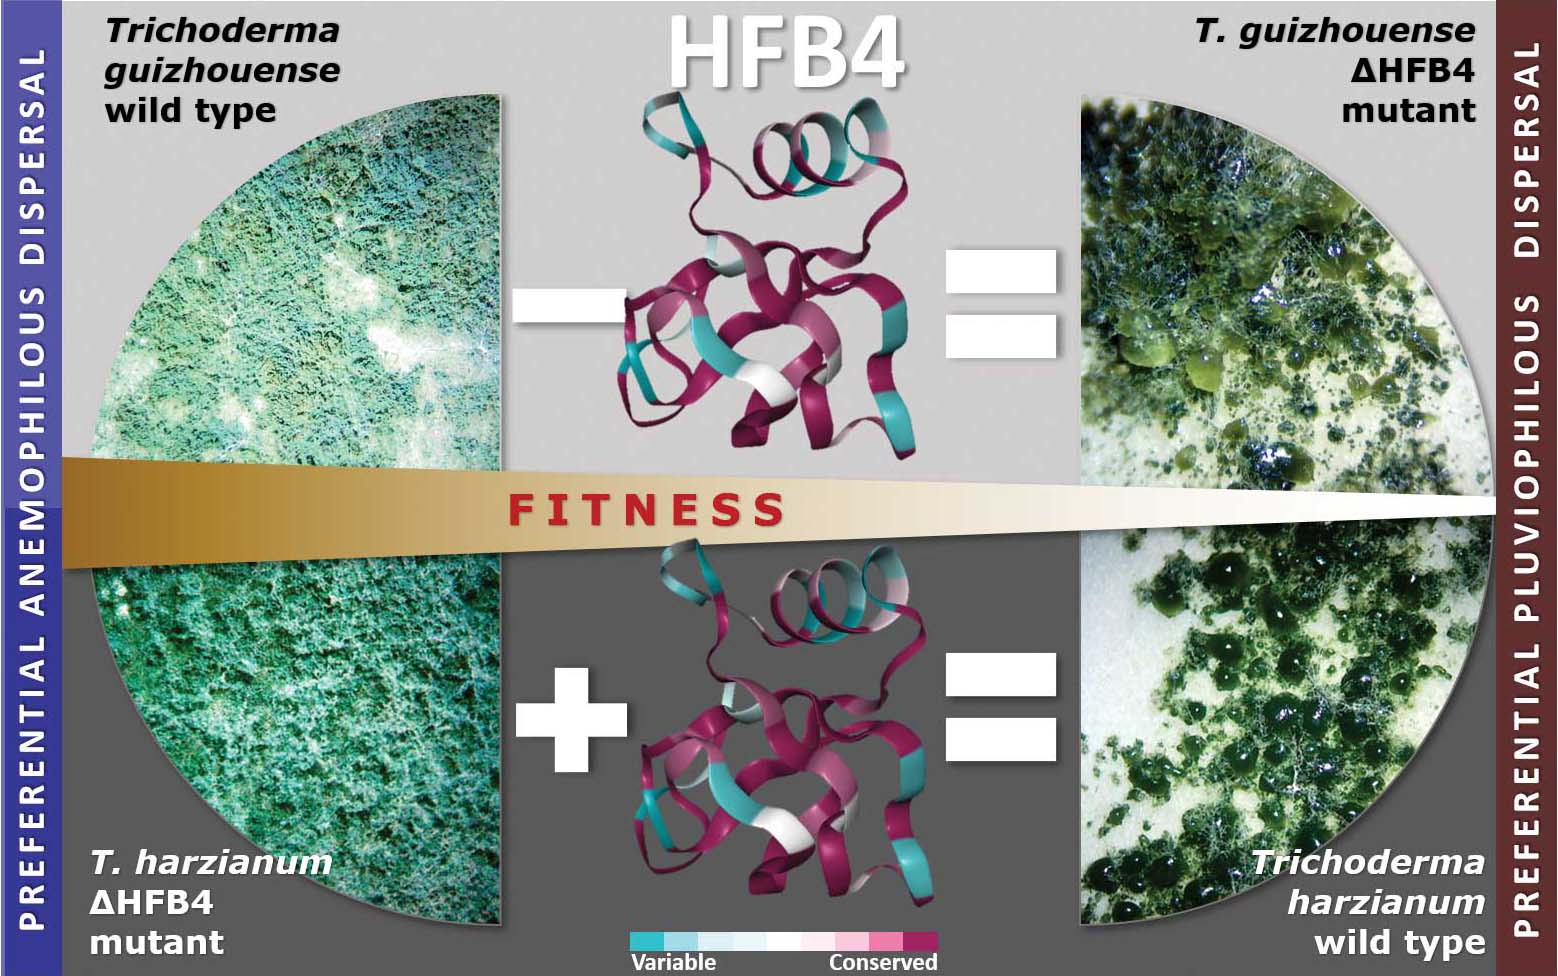 The role of HFB4 in Trichoderma fitness